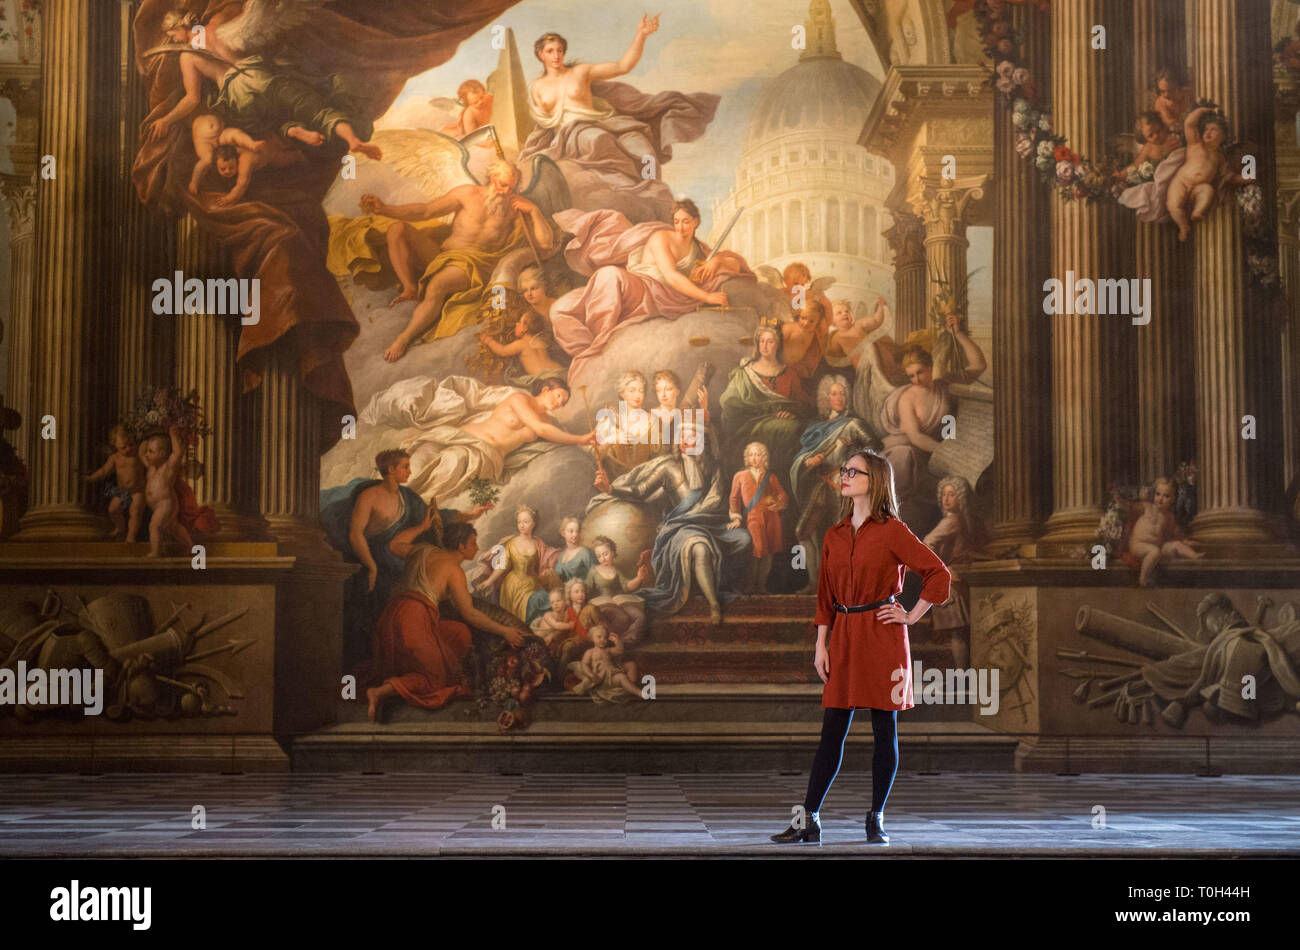 A visitor views Greenwich's Painted Hall at the Old Royal Naval College in London, before it reopens to the public on March 23 following a two-year National Lottery funded conservation project. Stock Photo